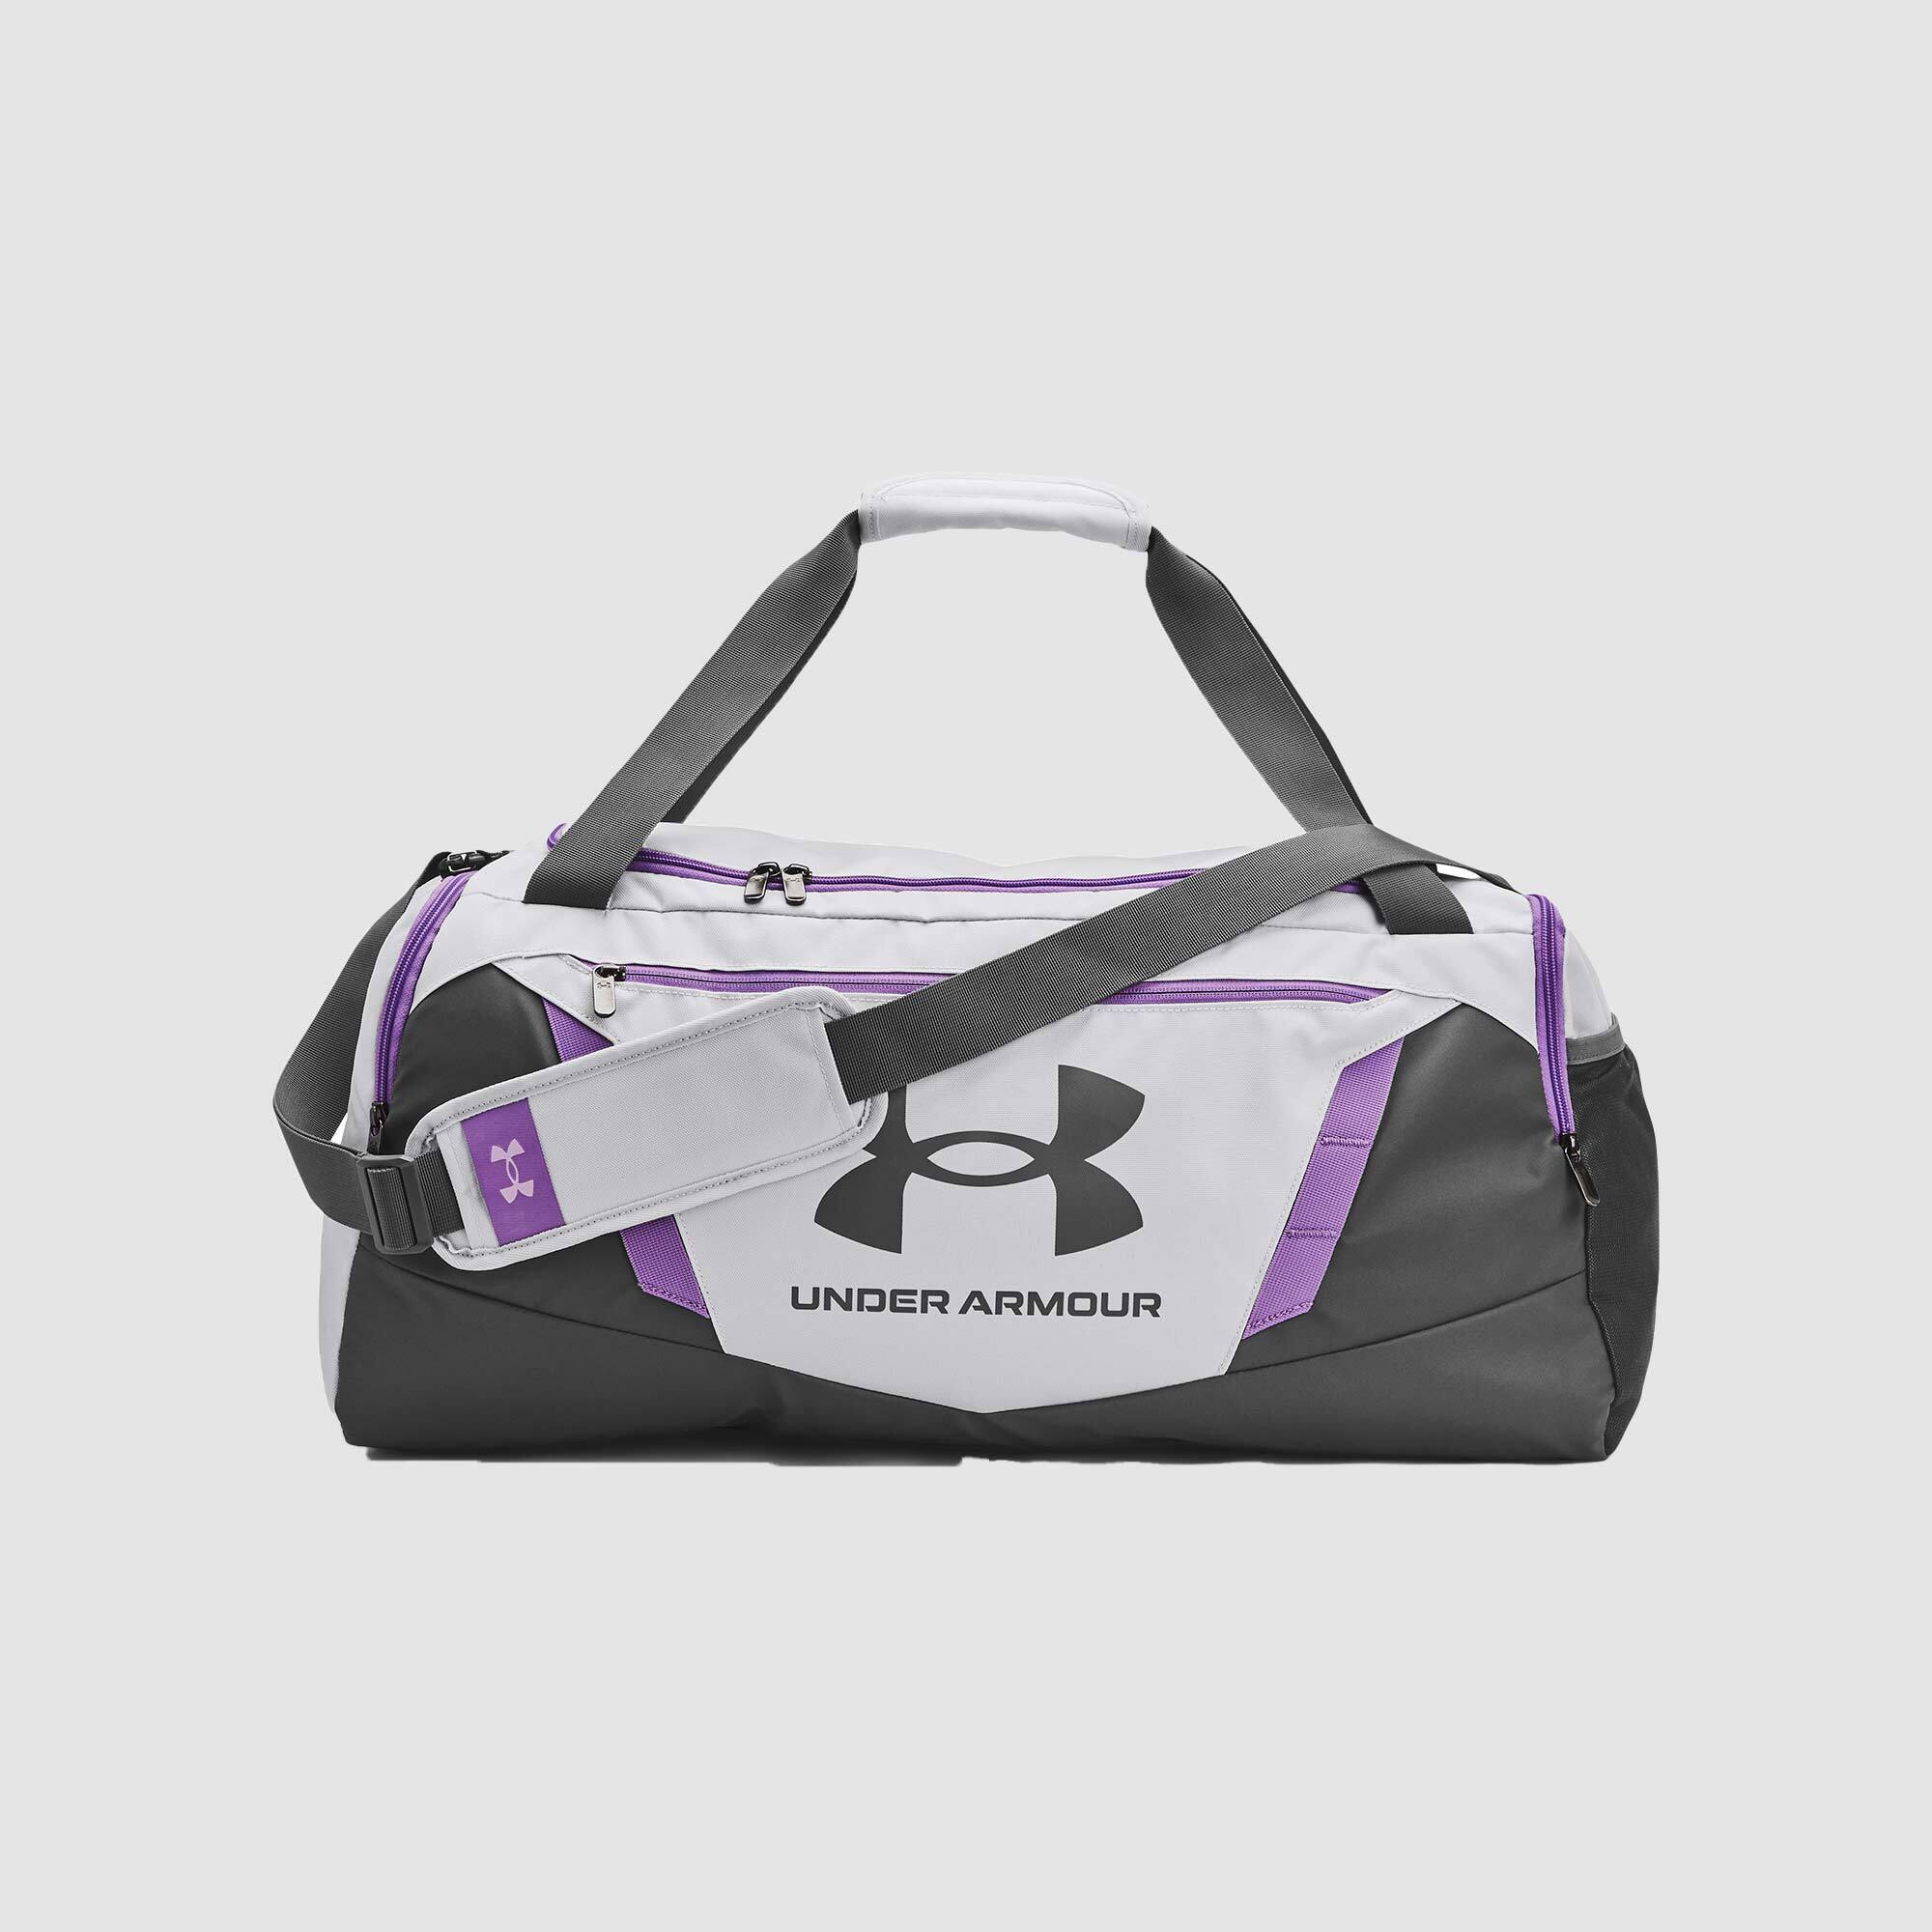 Under Armour Undeniable 5 MD Duffle Grey/Purple 58 Litres